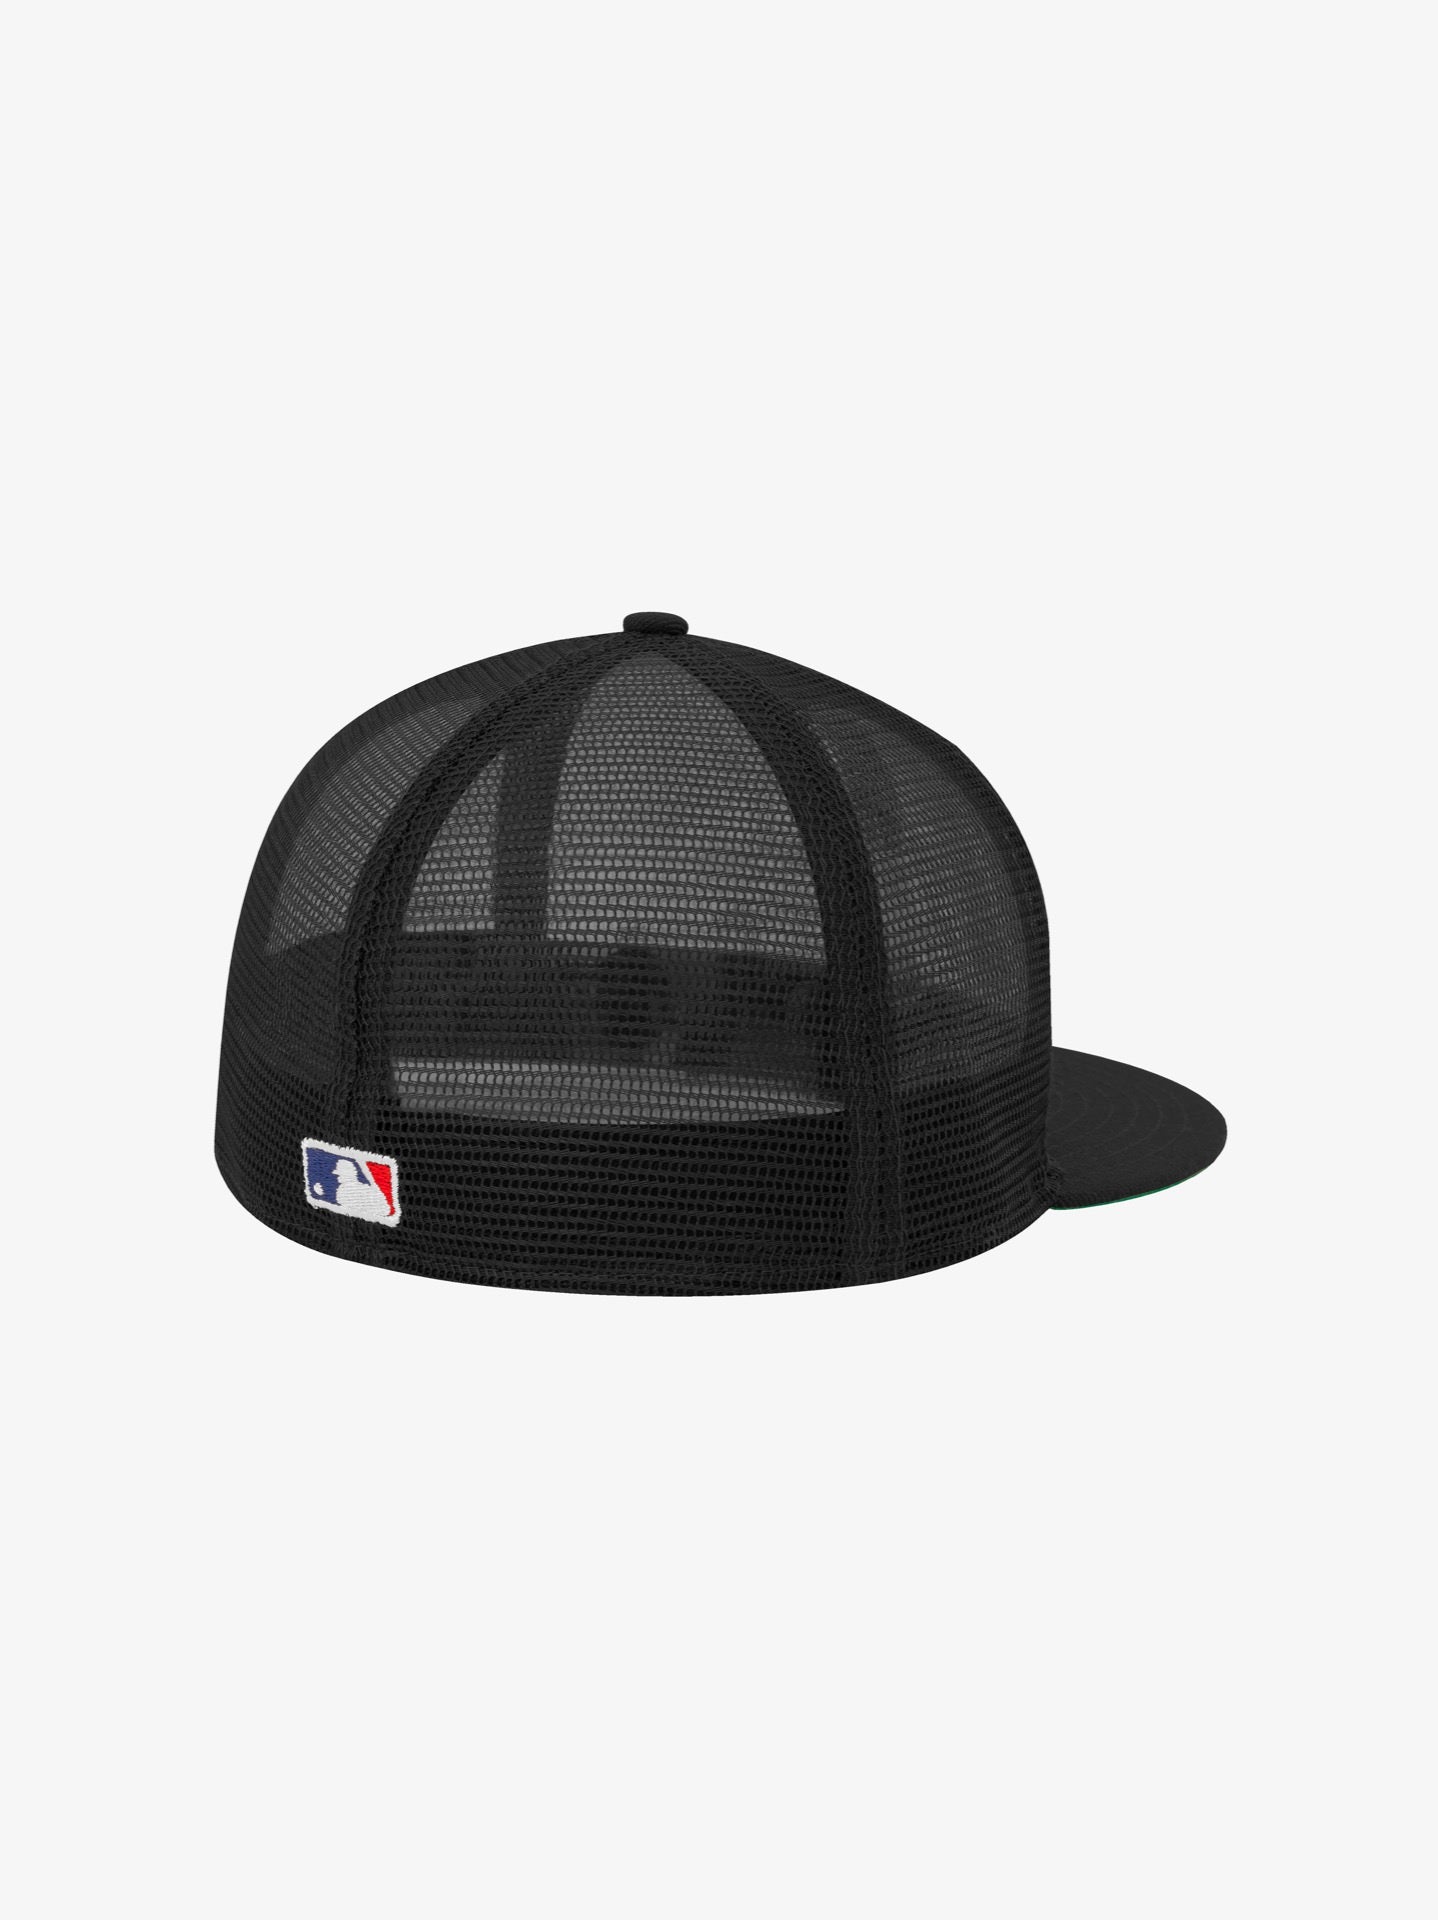 Fear of God and New Era Connect on Essentials 59Fifty Cap